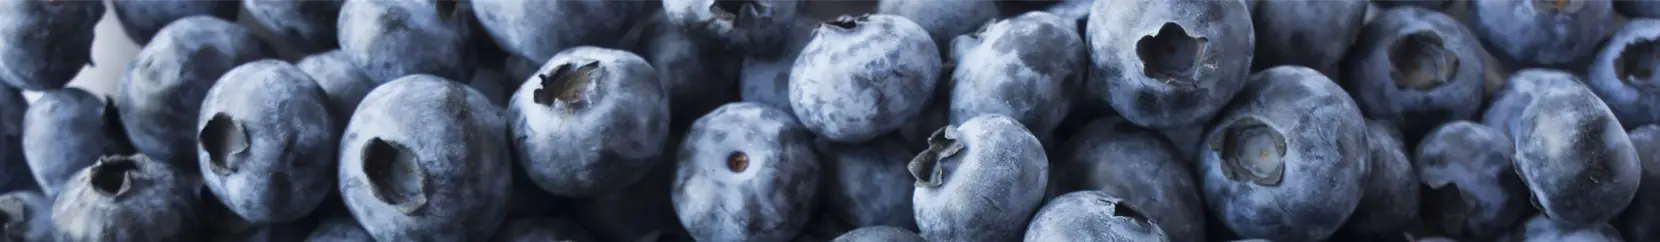 An up close photo of ripe loose blueberries.